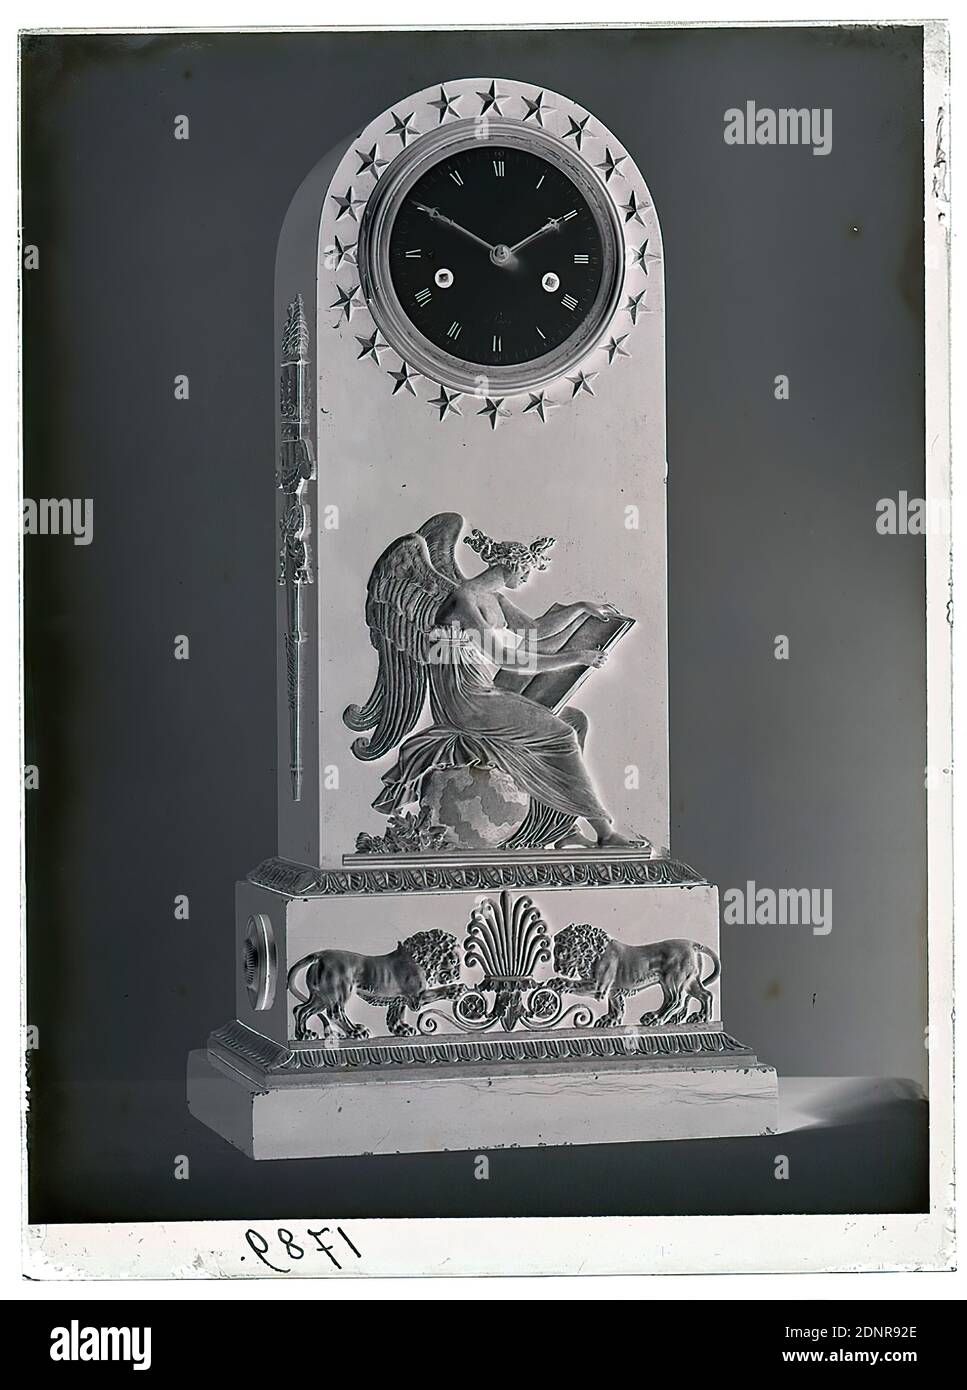 Wilhelm Weimar, grandfather clock, glass negative, black and white negative process, total: height: 23.8 cm; width: 17.8 cm, numbered: u. li. : in black ink: 1789, photography, Work of applied art, Stars, time, clock, Allegory of time and eternity, Book, Lion (predators), Ornaments, Time, Arts and crafts, Applied arts, Industrial design Stock Photo